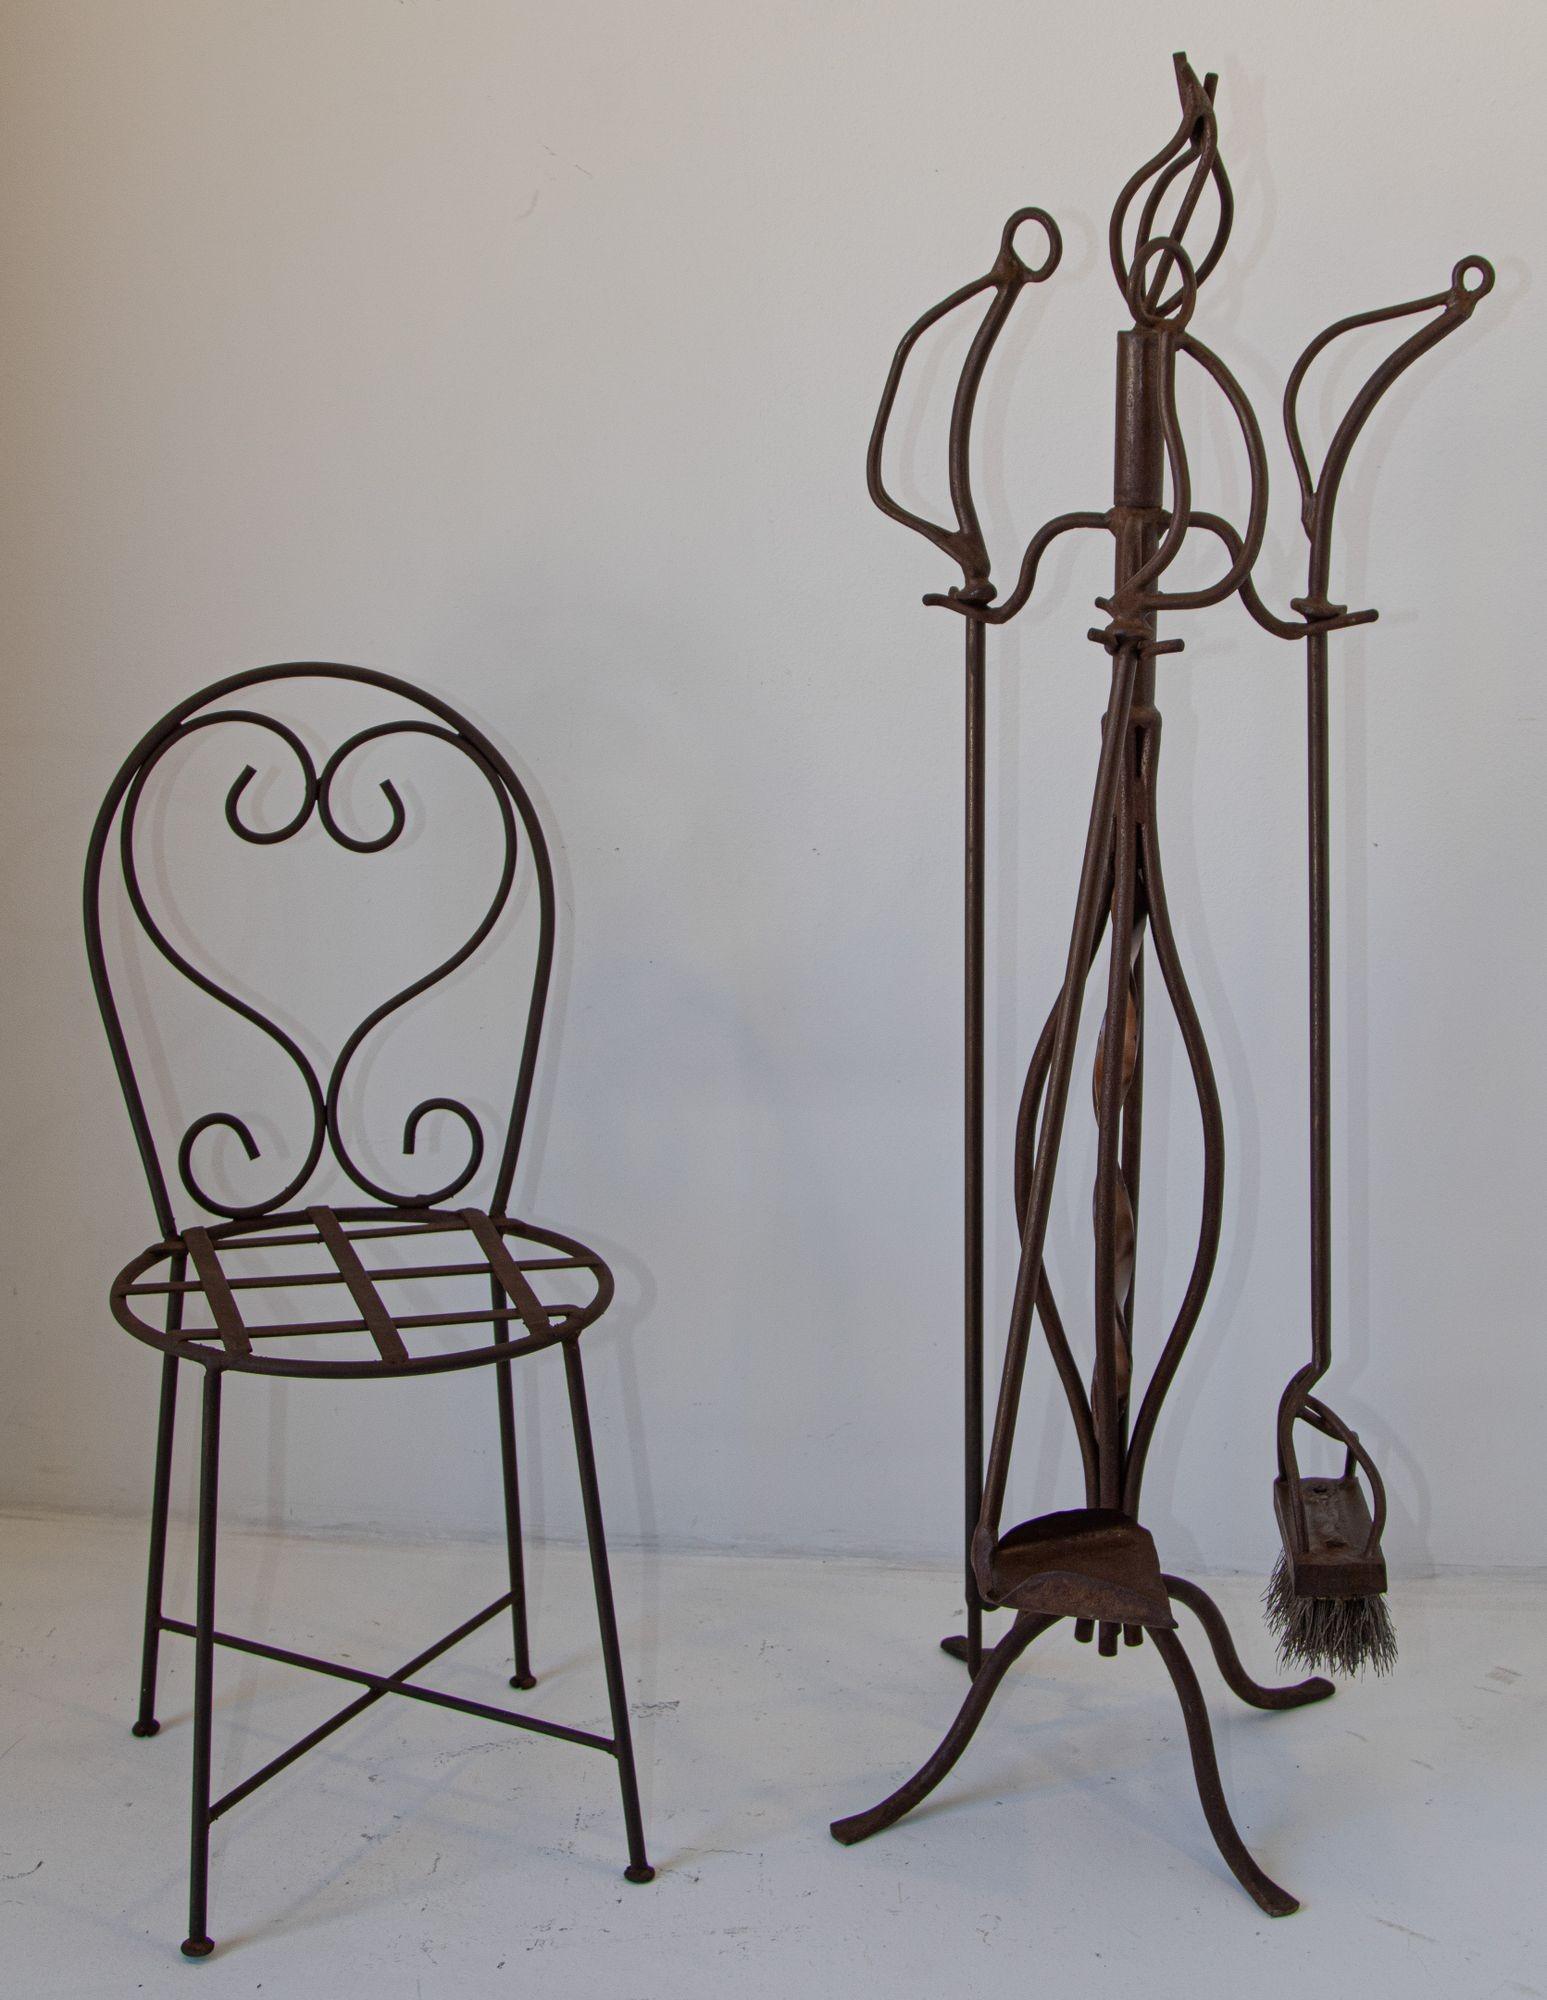 Iron Forged Oversized Fire Tools.
Forged fireplace tools, iron forged, artisan blacksmiths formed, forged stand with top scrolled four arms with poker, shovel and broom, missing tongs.
This sculptural hand-forged fireplace tool set is a true piece